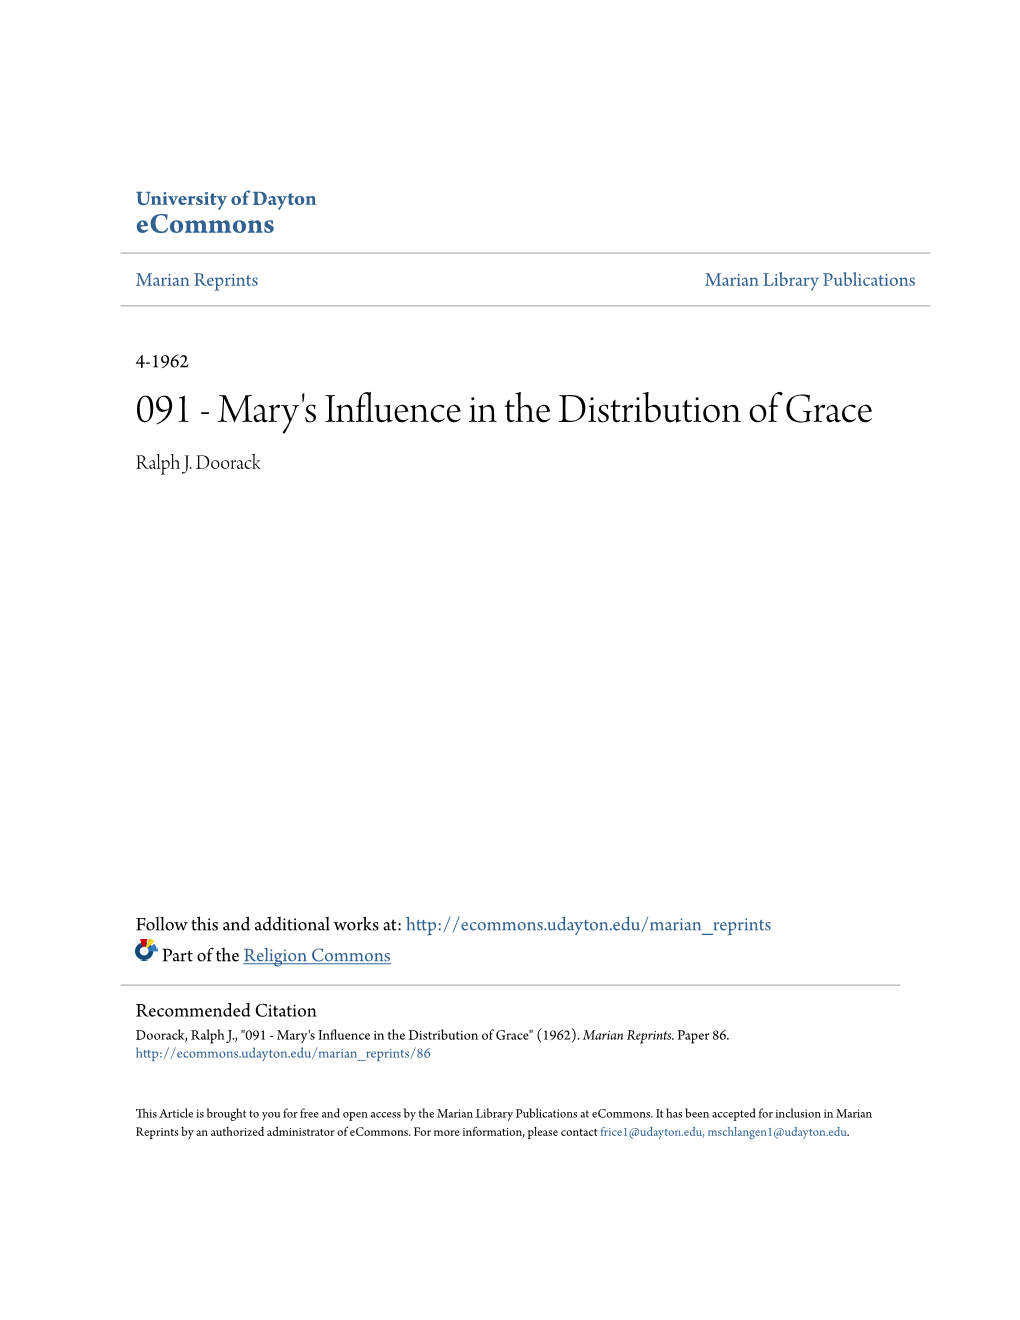 Mary's Influence in the Distribution of Grace Ralph J